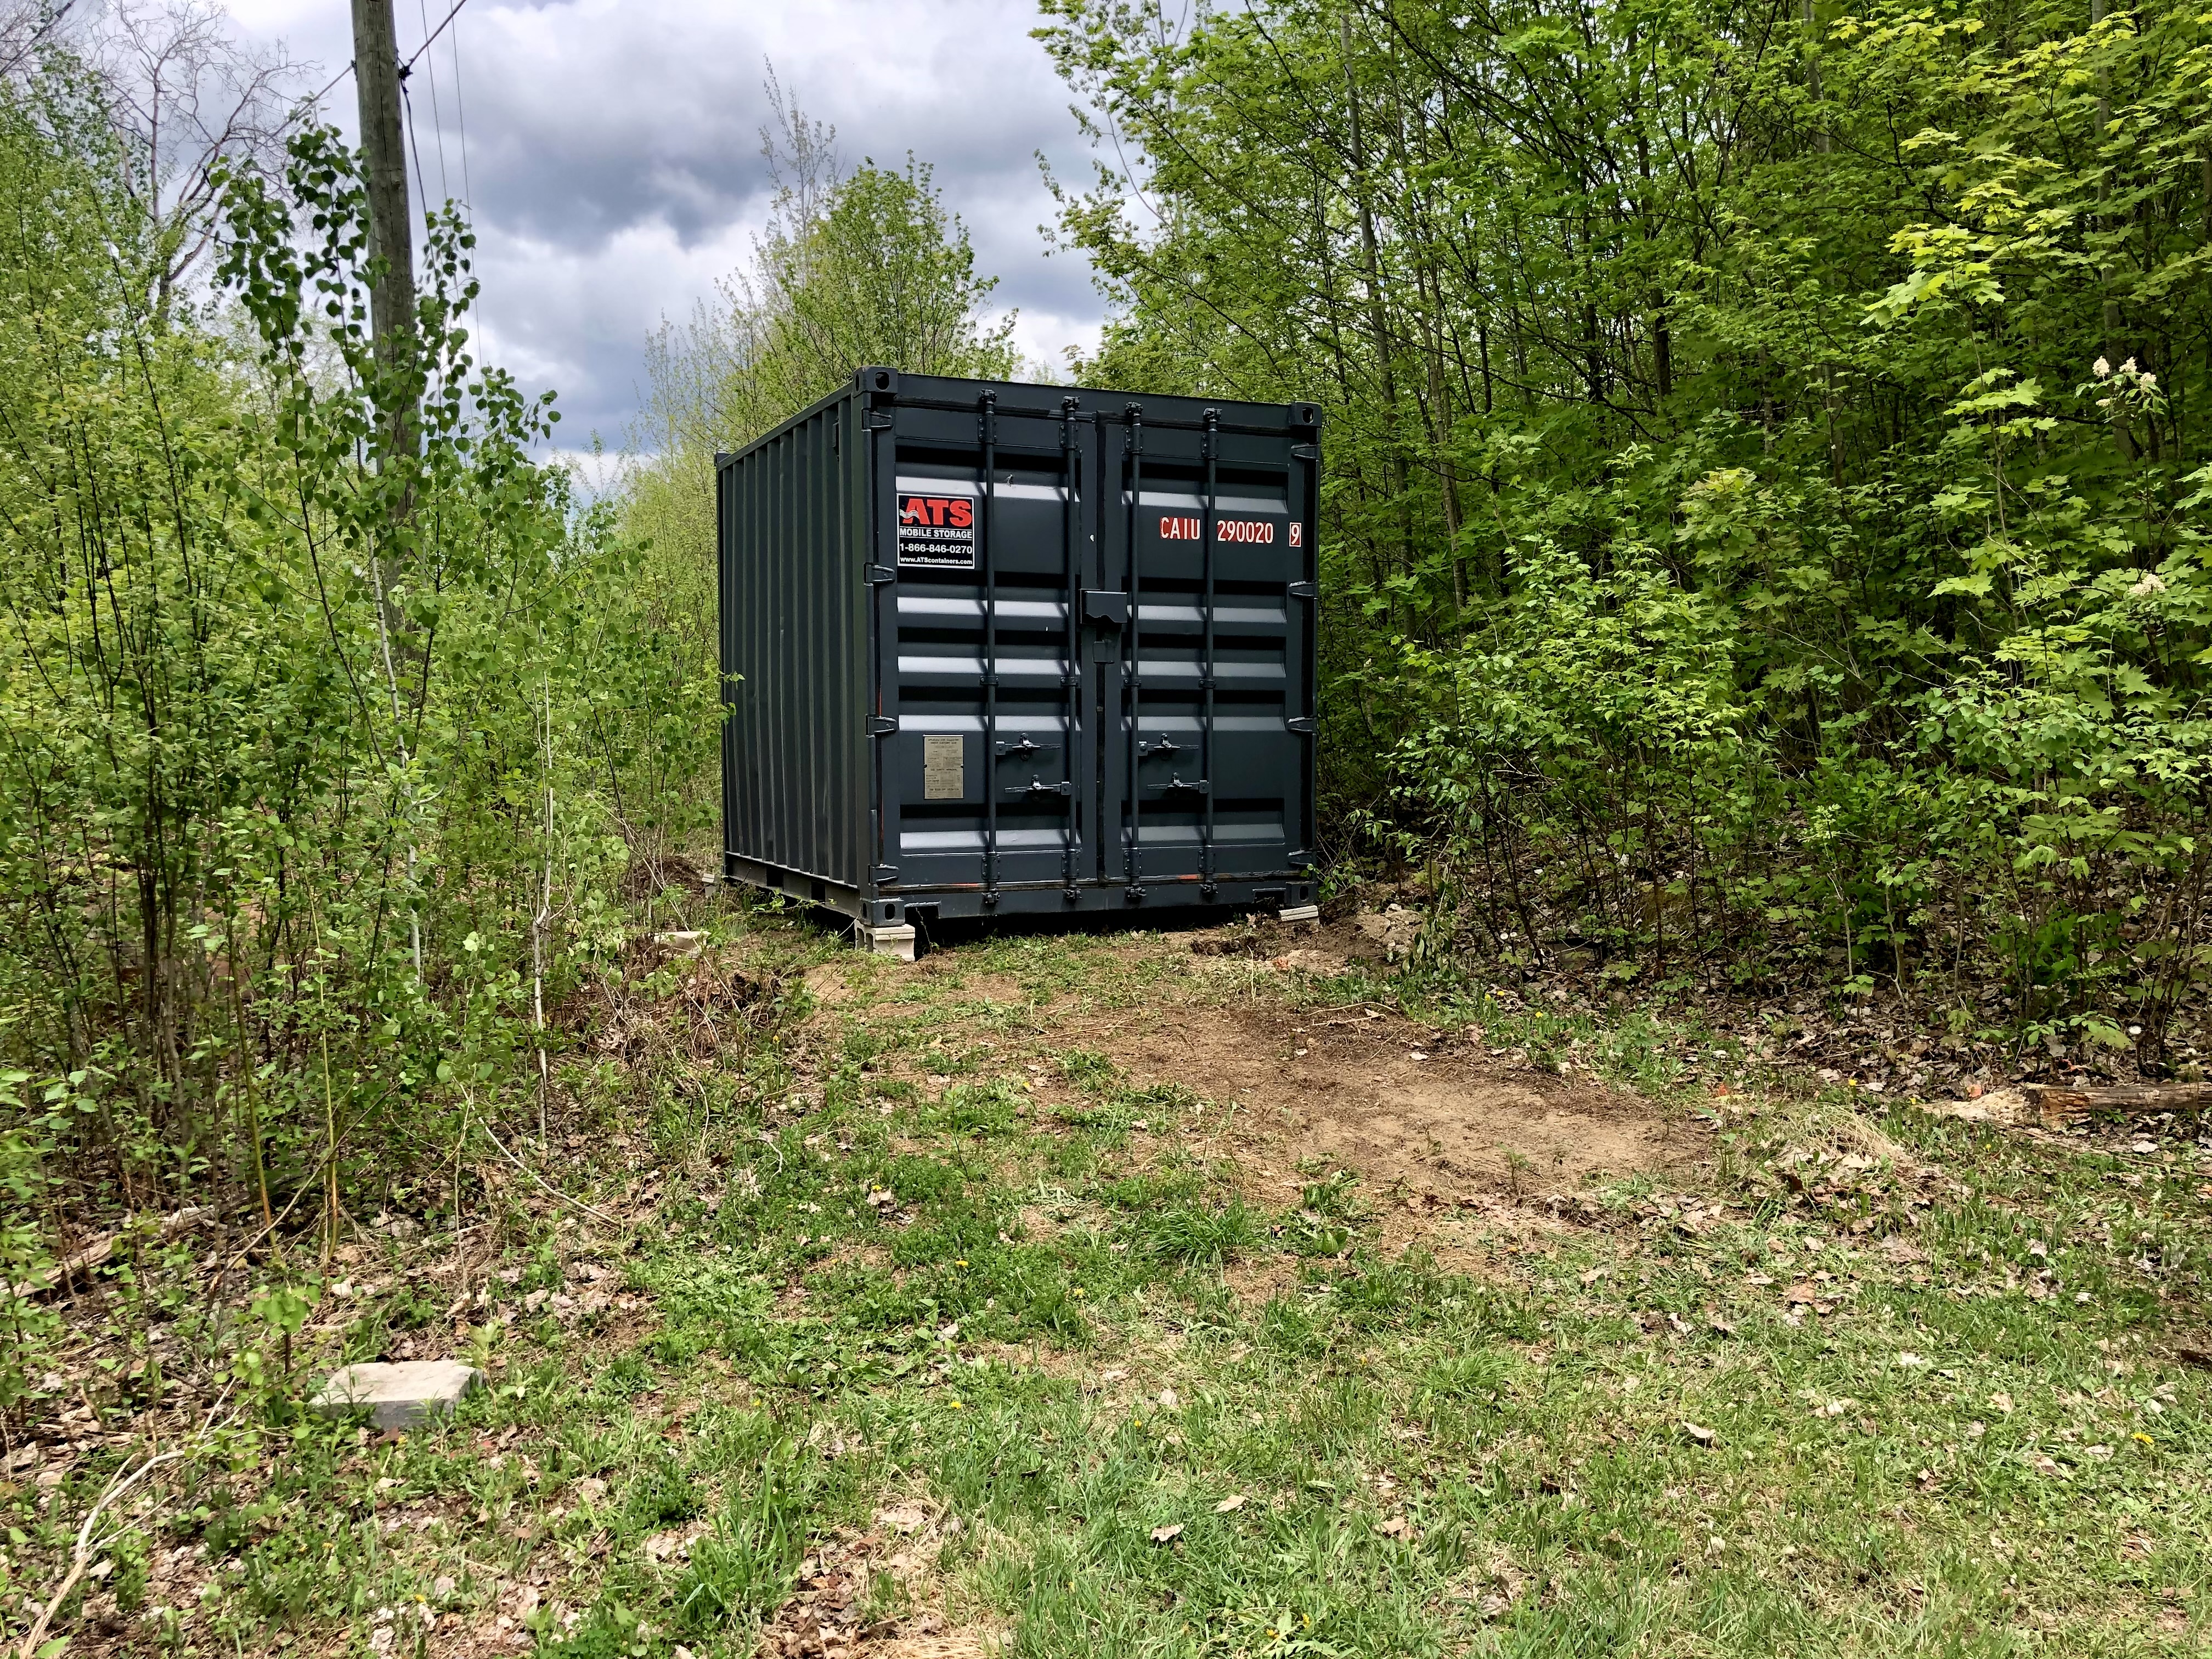 A small (ten foot), grey shipping container plopped down in the grass